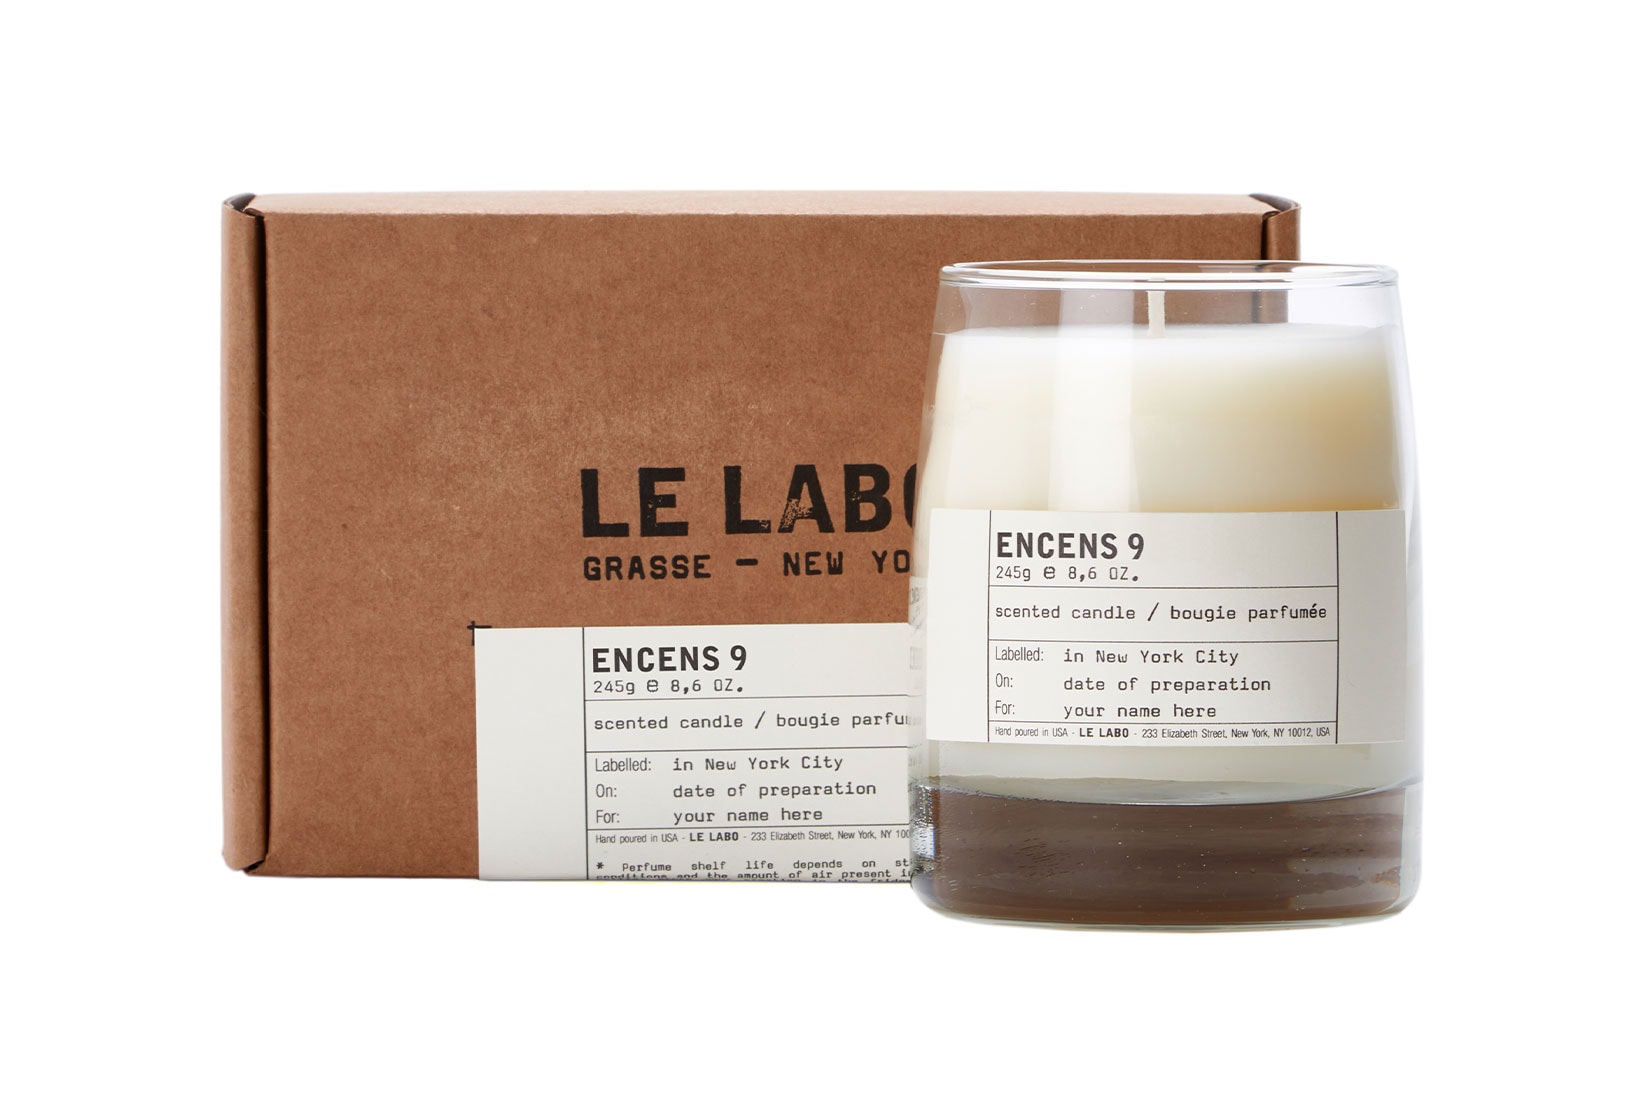 le labo candles home collection fragrance encens 9 box label